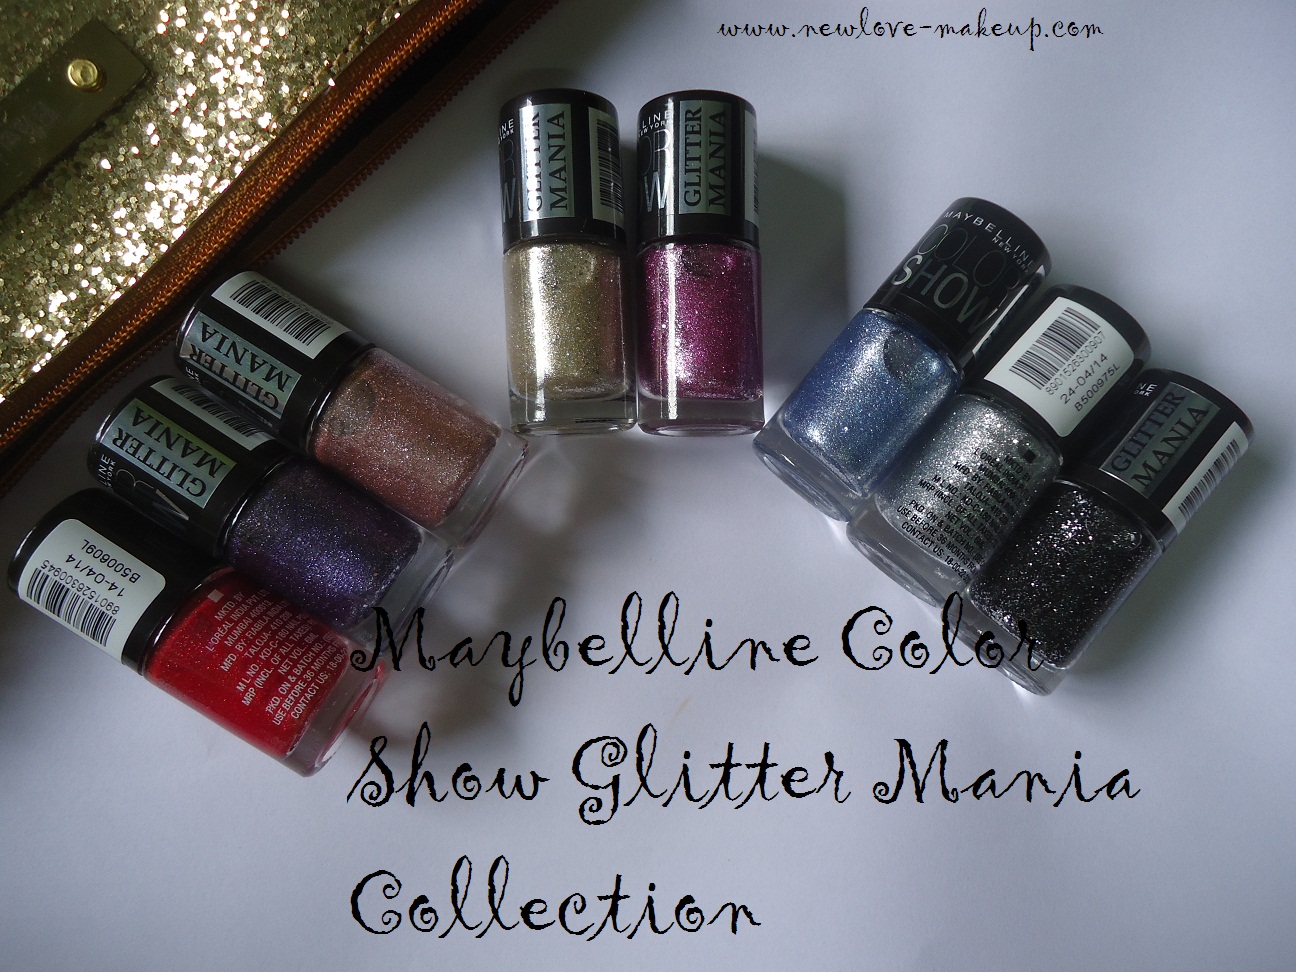 Maybelline Color Show Glitter Review, Swatches, and Nailfie Contest! - New Love - Makeup